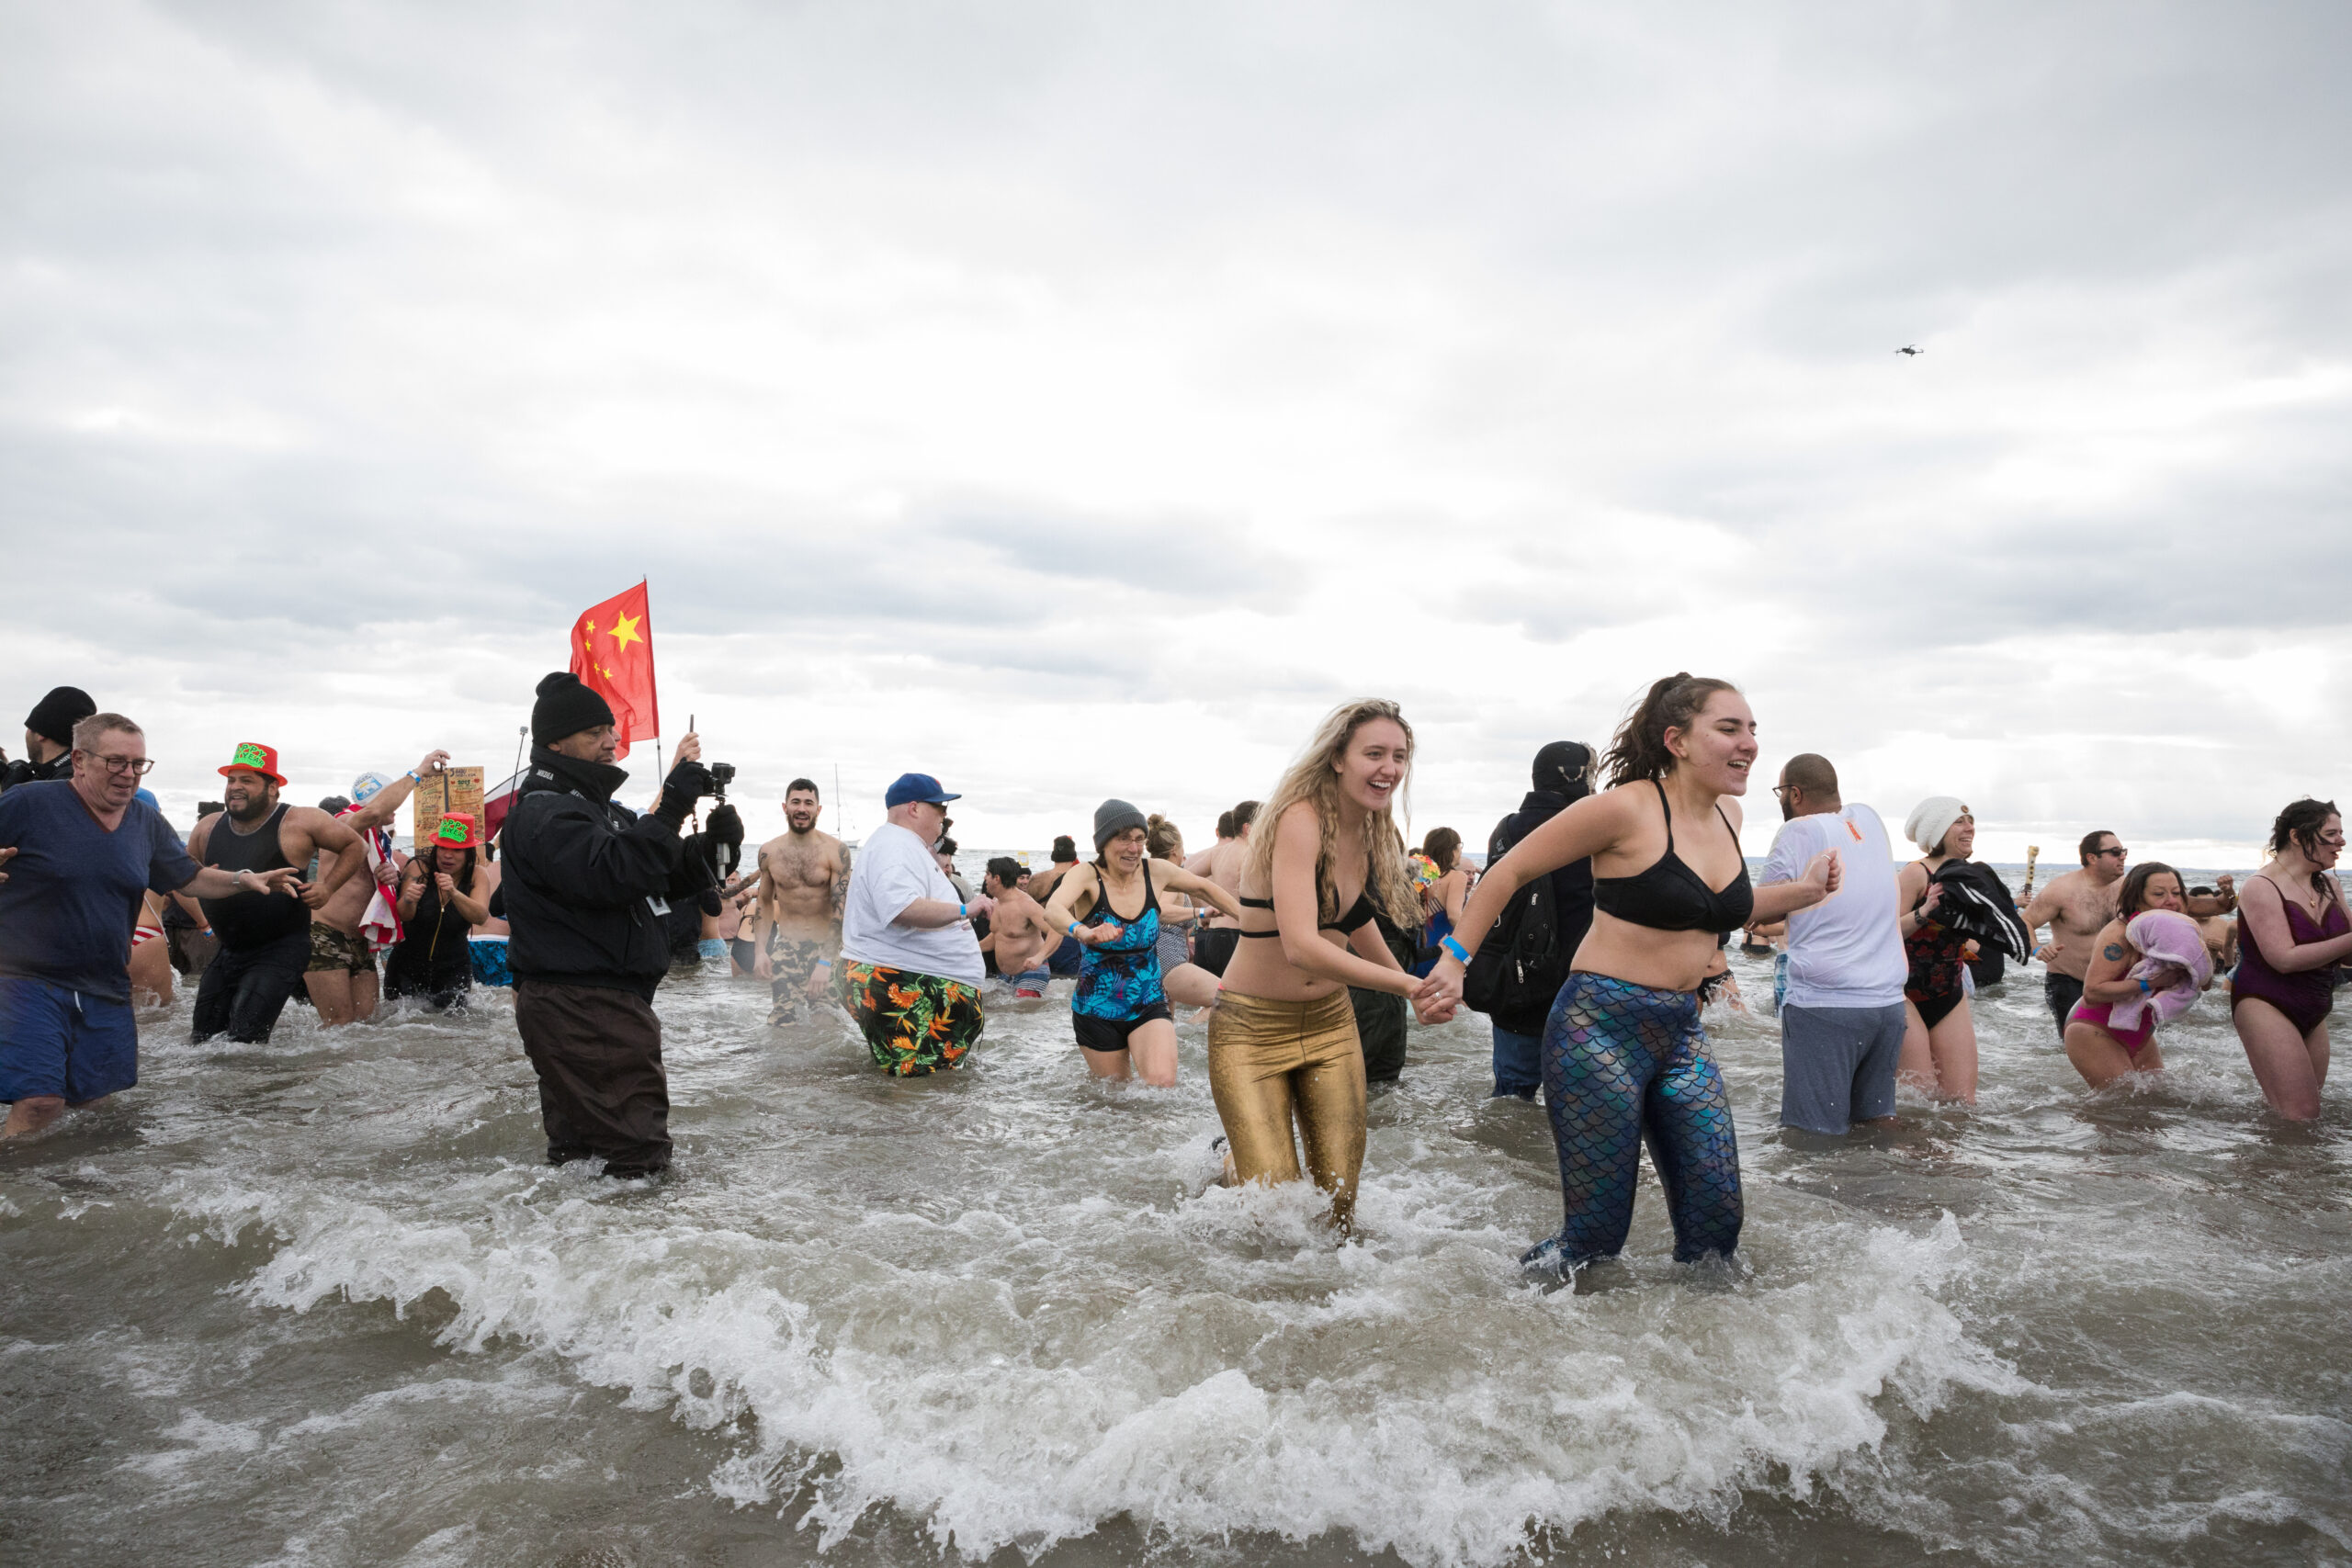 The January swimmers use the polar plunge to refresh themselves for the year ahead.